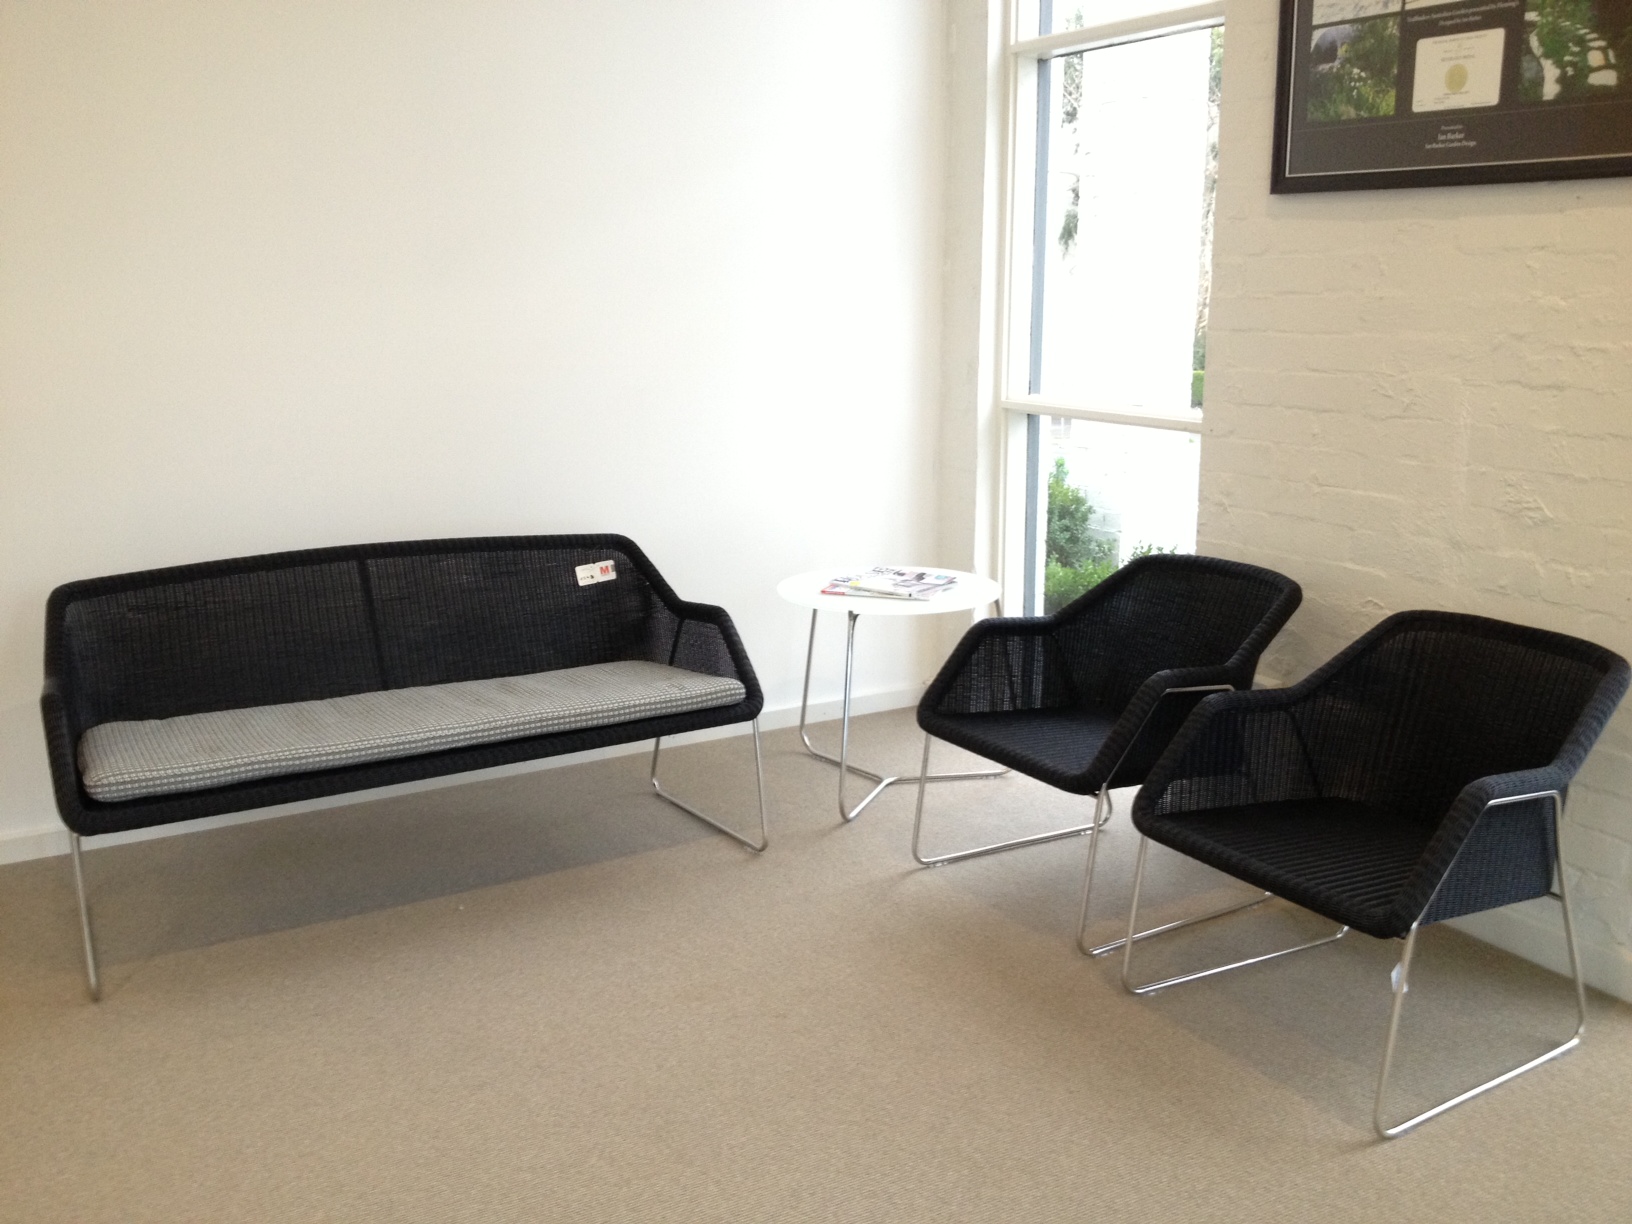 Mood 2 Seat Sofa, Easy Chairs and Mood Round Coffee table from Cosh Living in the Ian Barker Gardens waiting area